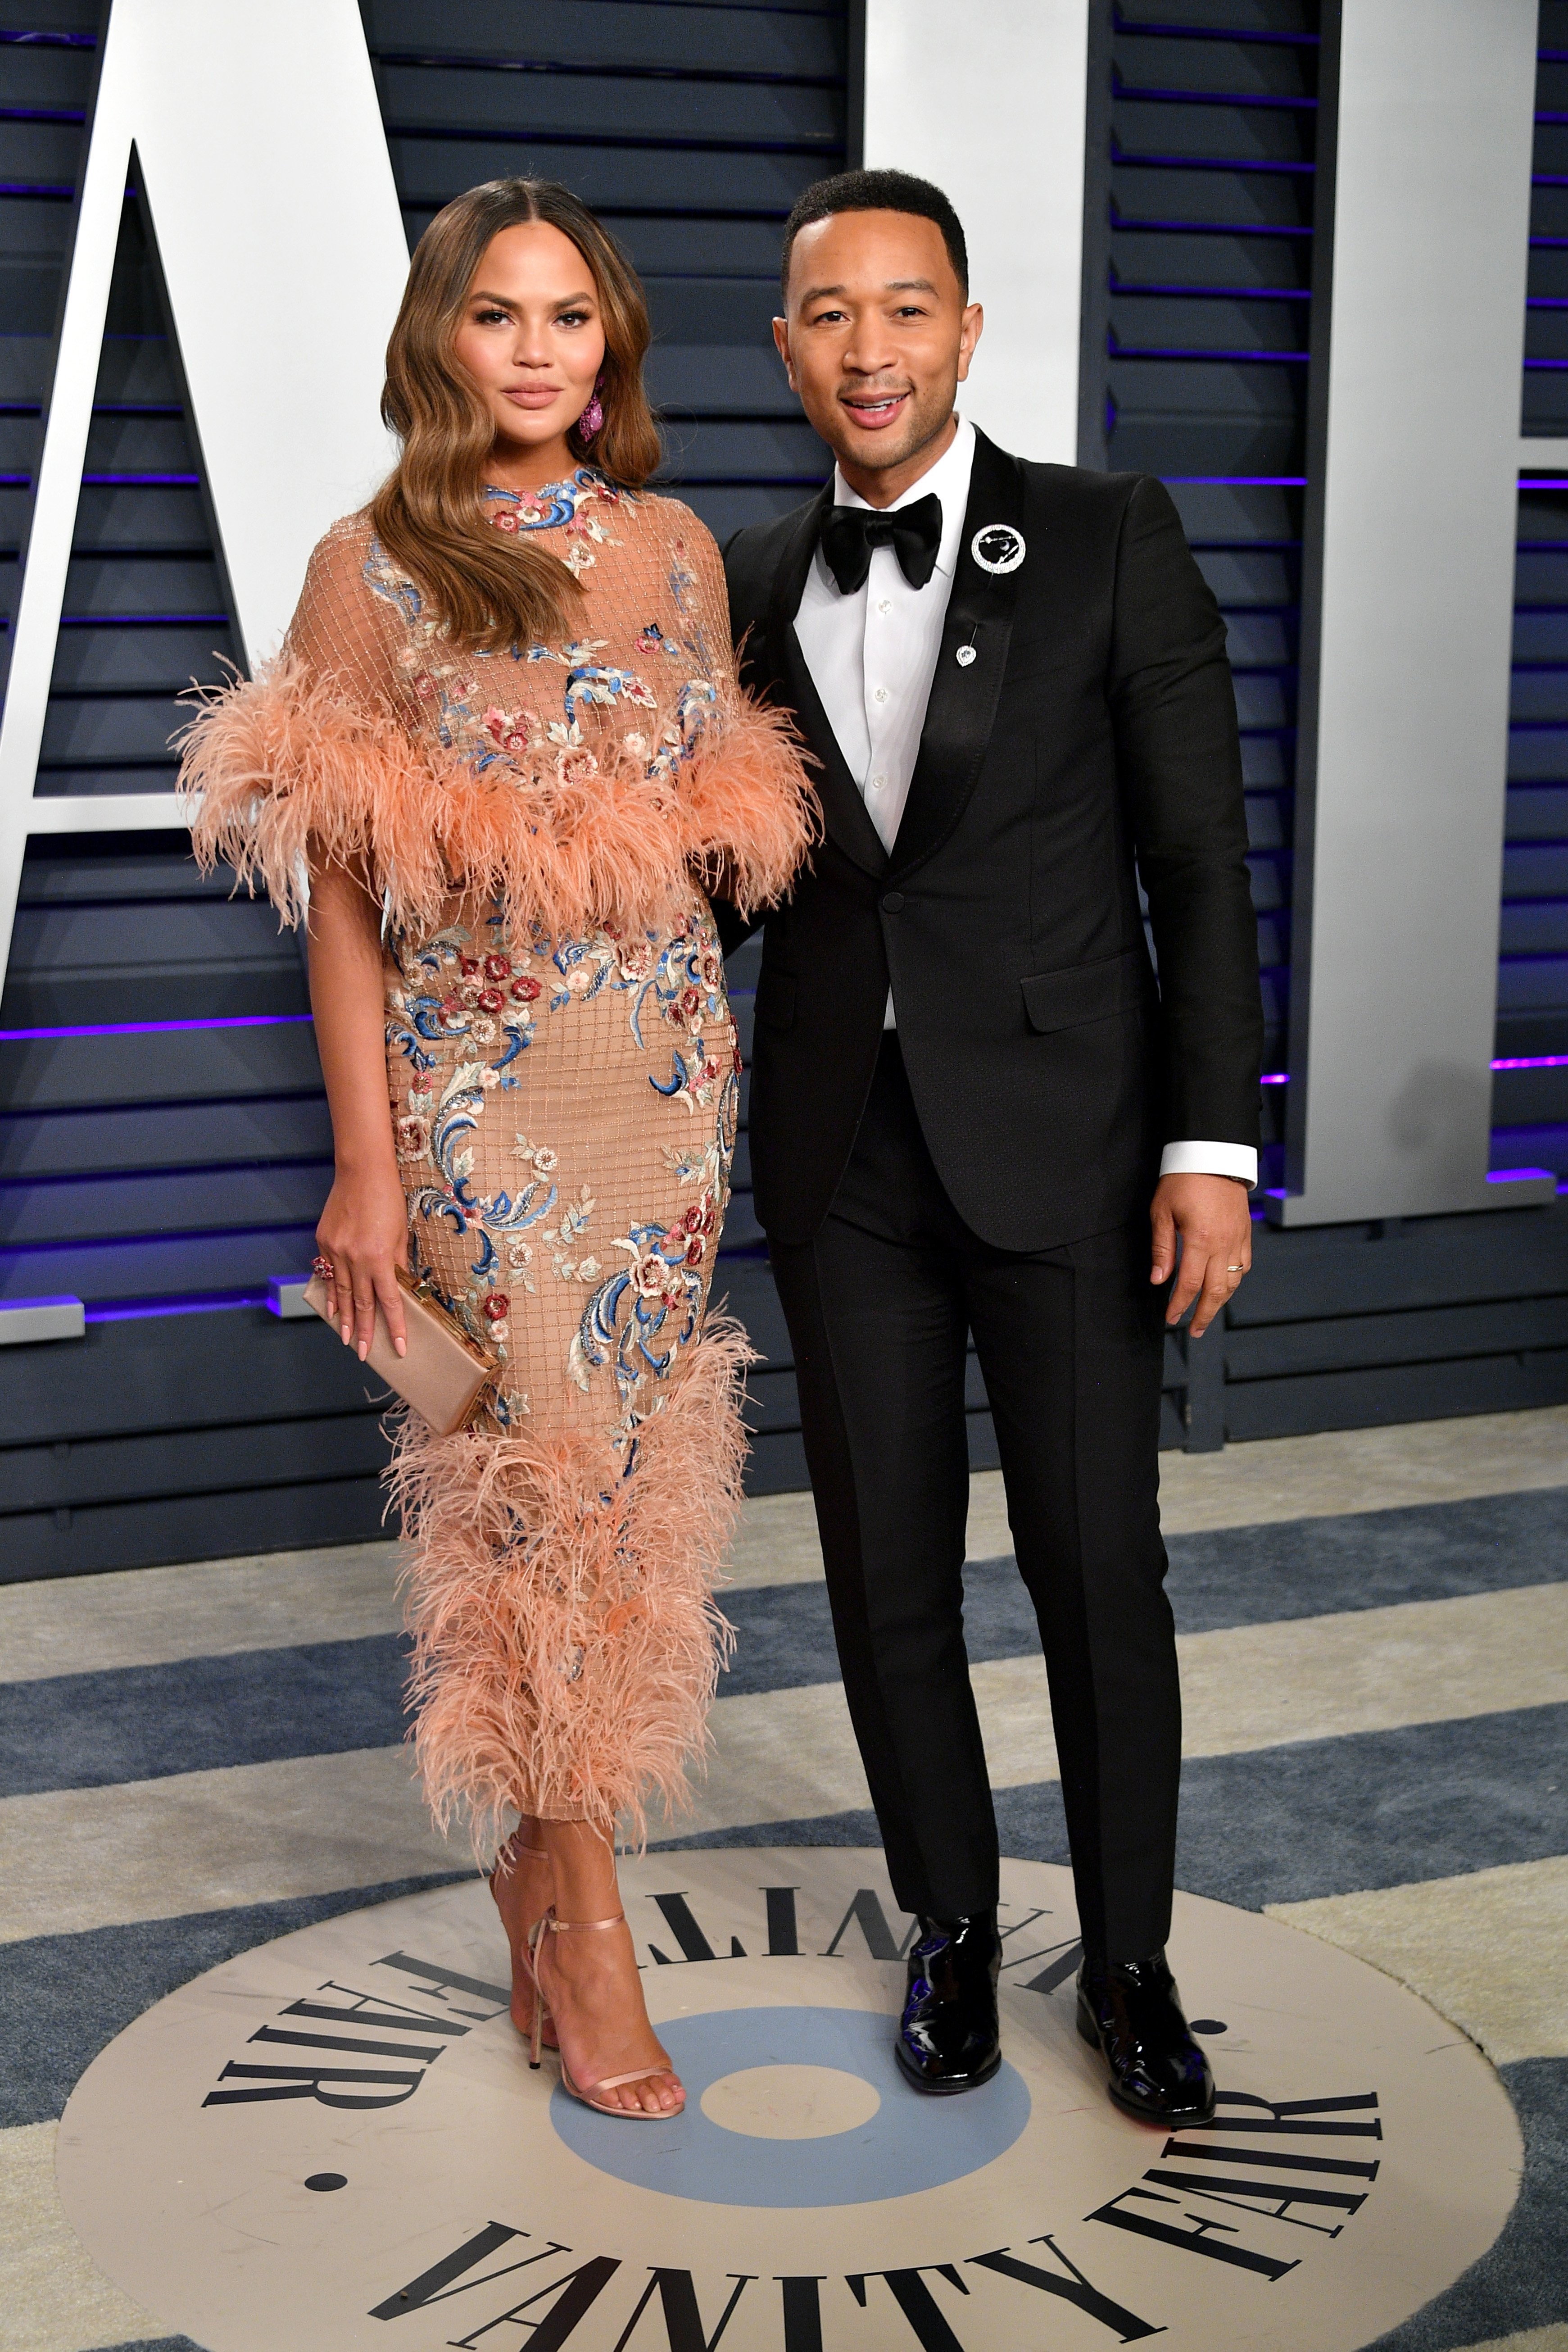 Chrissy Teigen and John Legend attend the 2019 Vanity Fair Oscar Party in Beverly Hills, California on February 24, 2019 | Photo: Getty Images